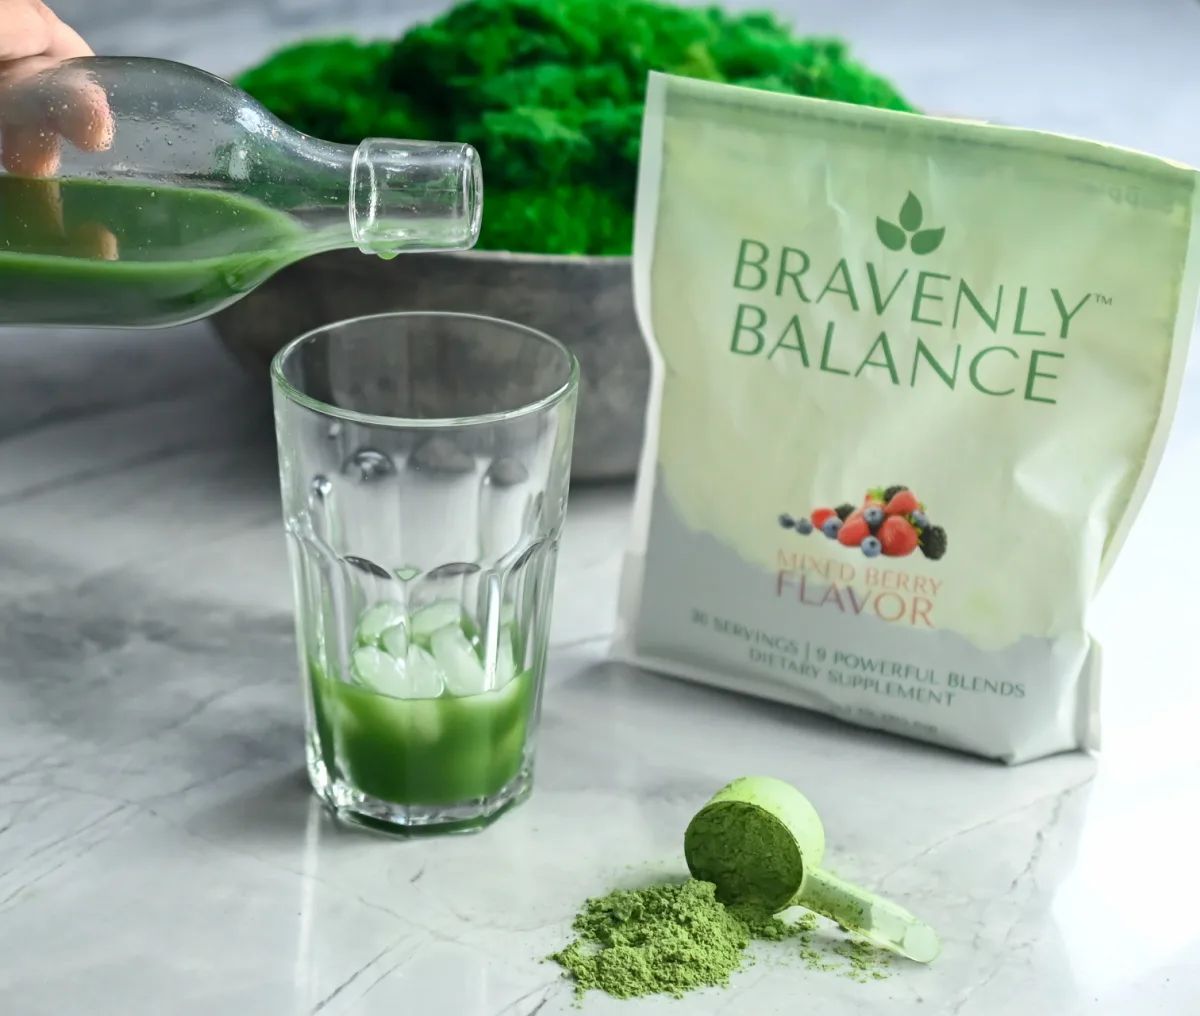 Bravenly Balance greens juice supplement mixed and ready to serve